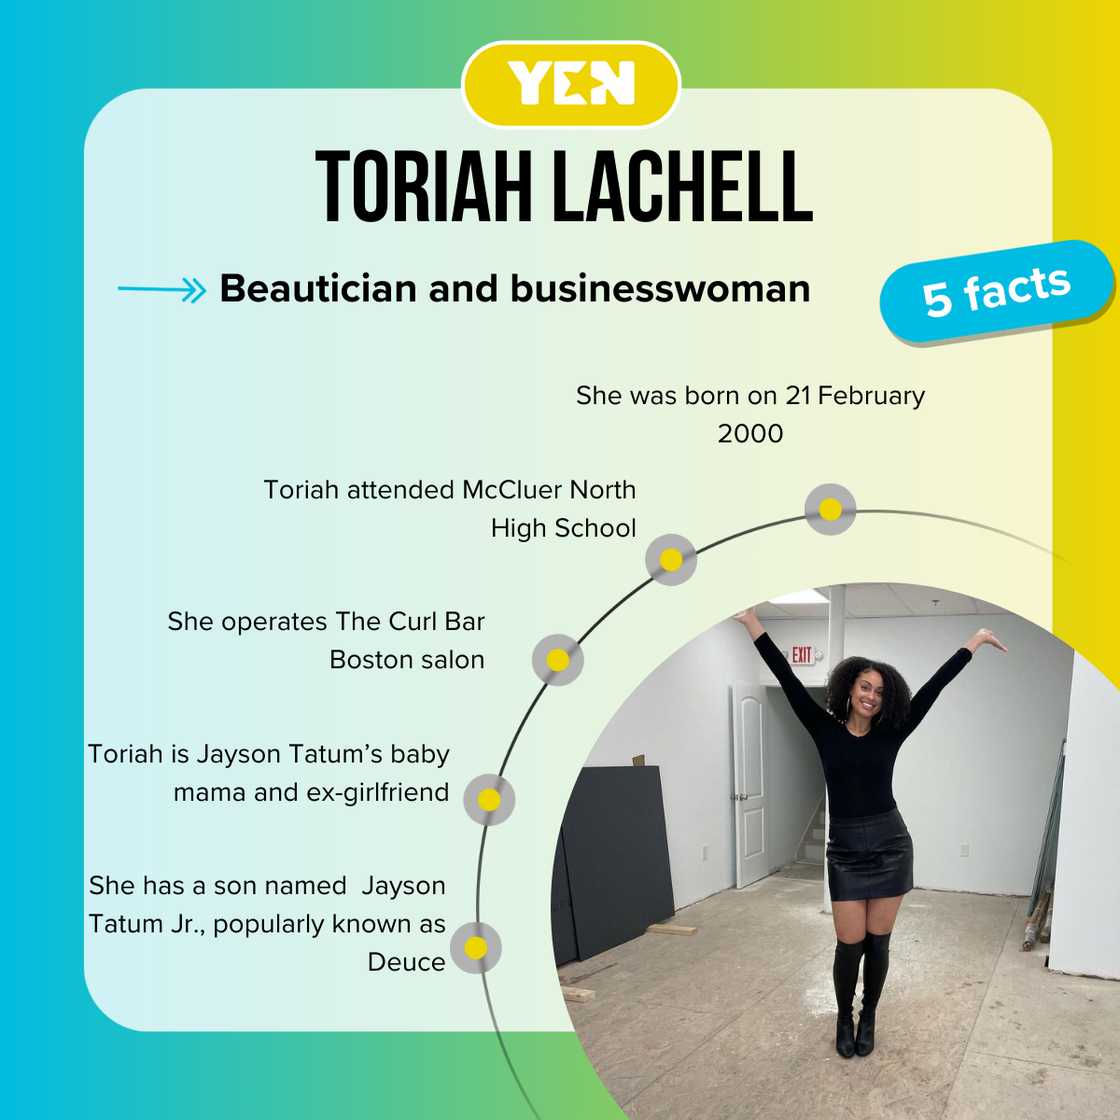 Top 5 facts about Toriah Lachell